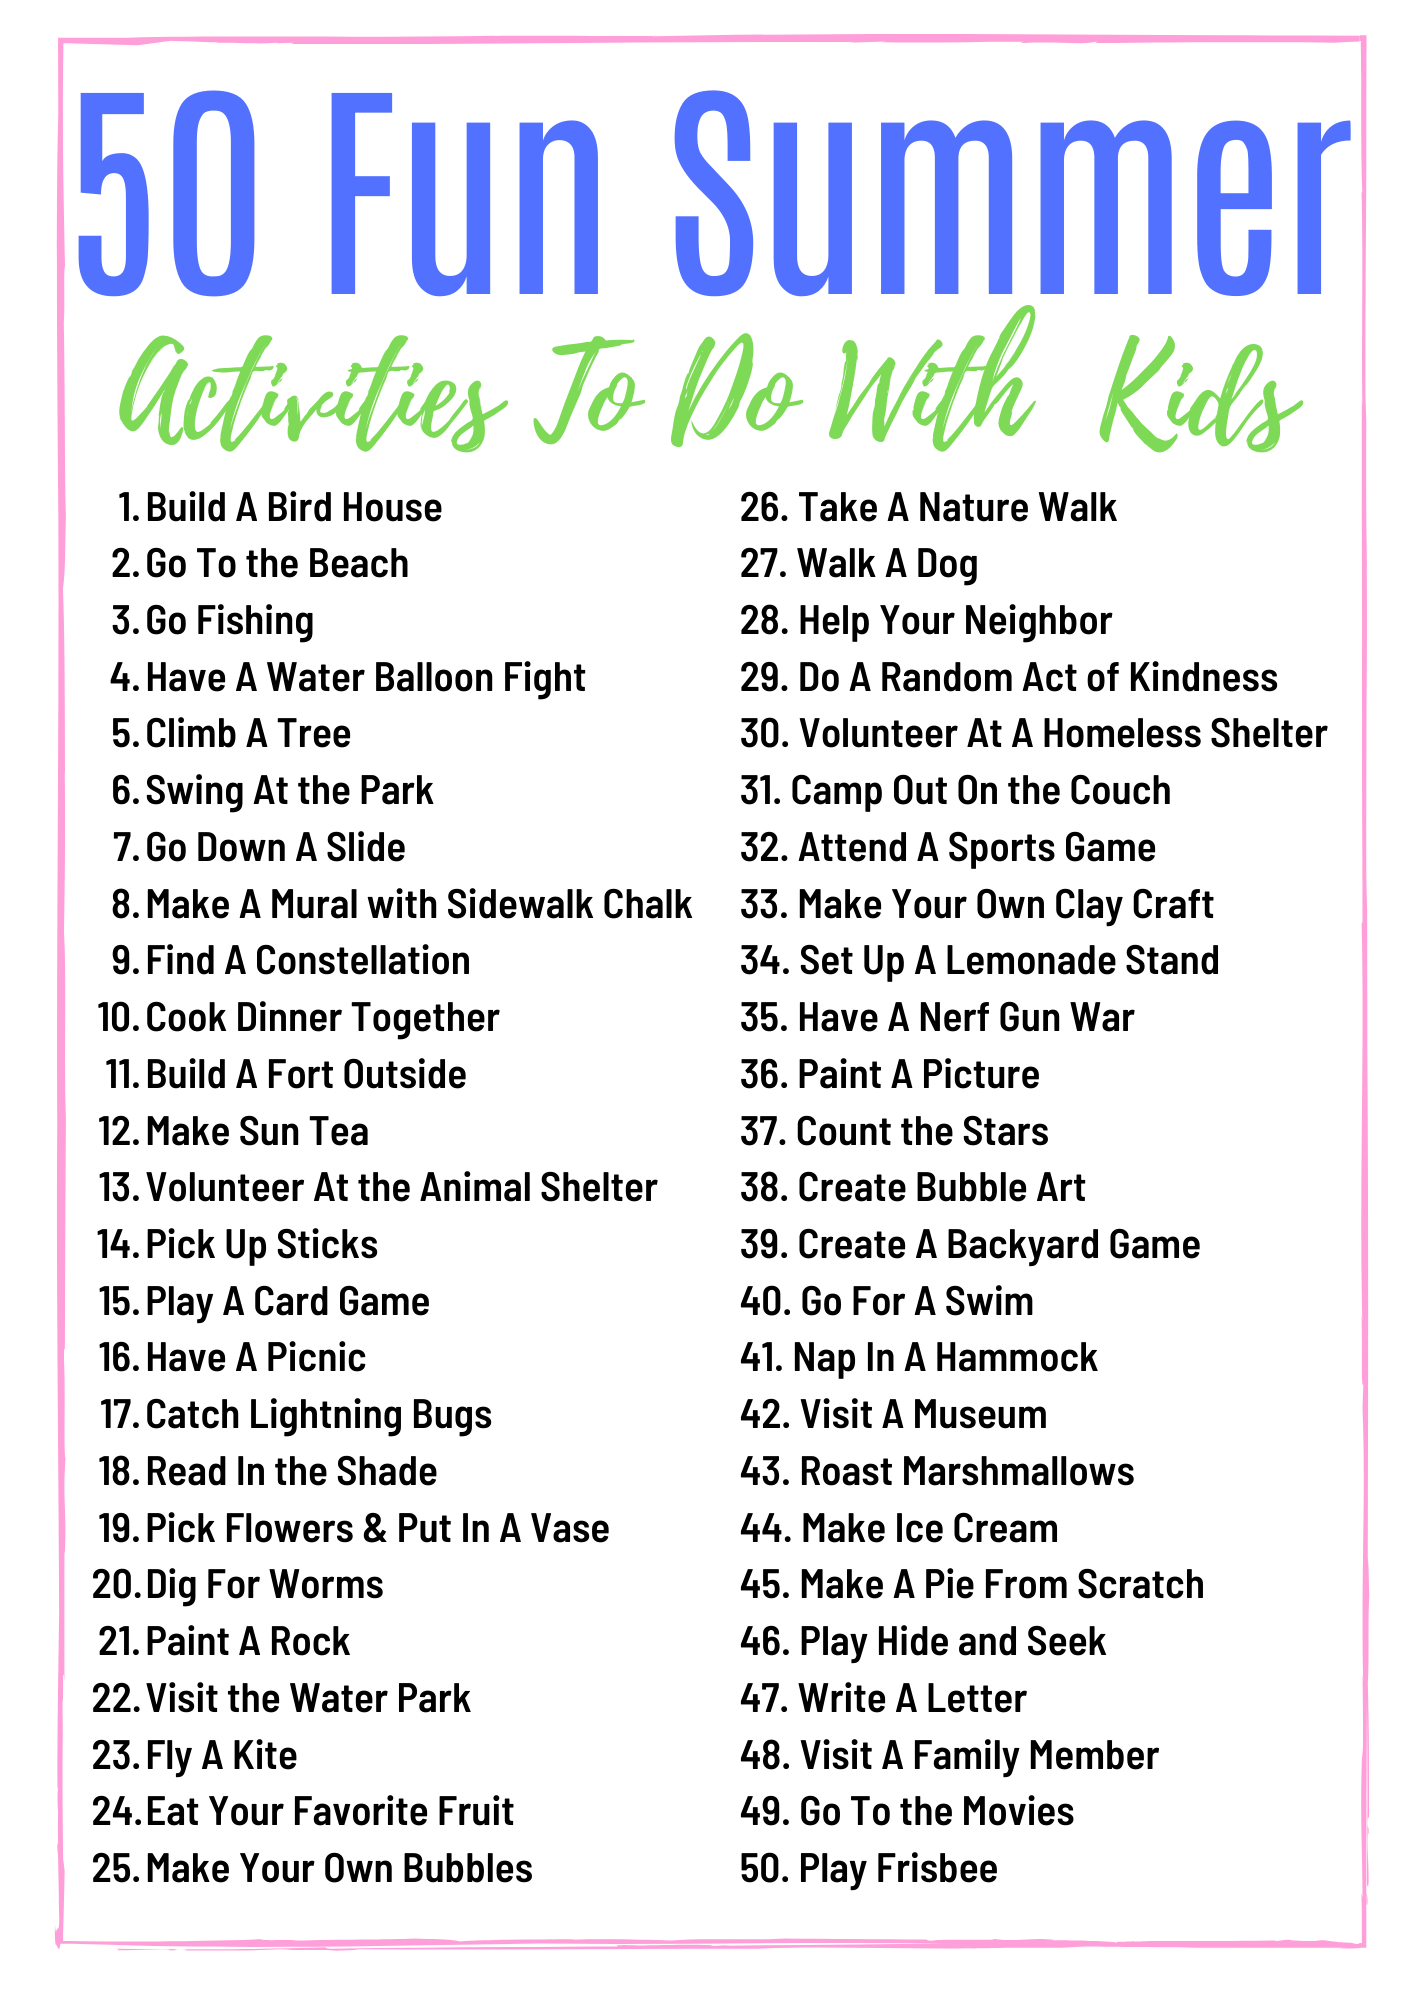 Printable Summer Activity List for Kids - Views From a Step Stool